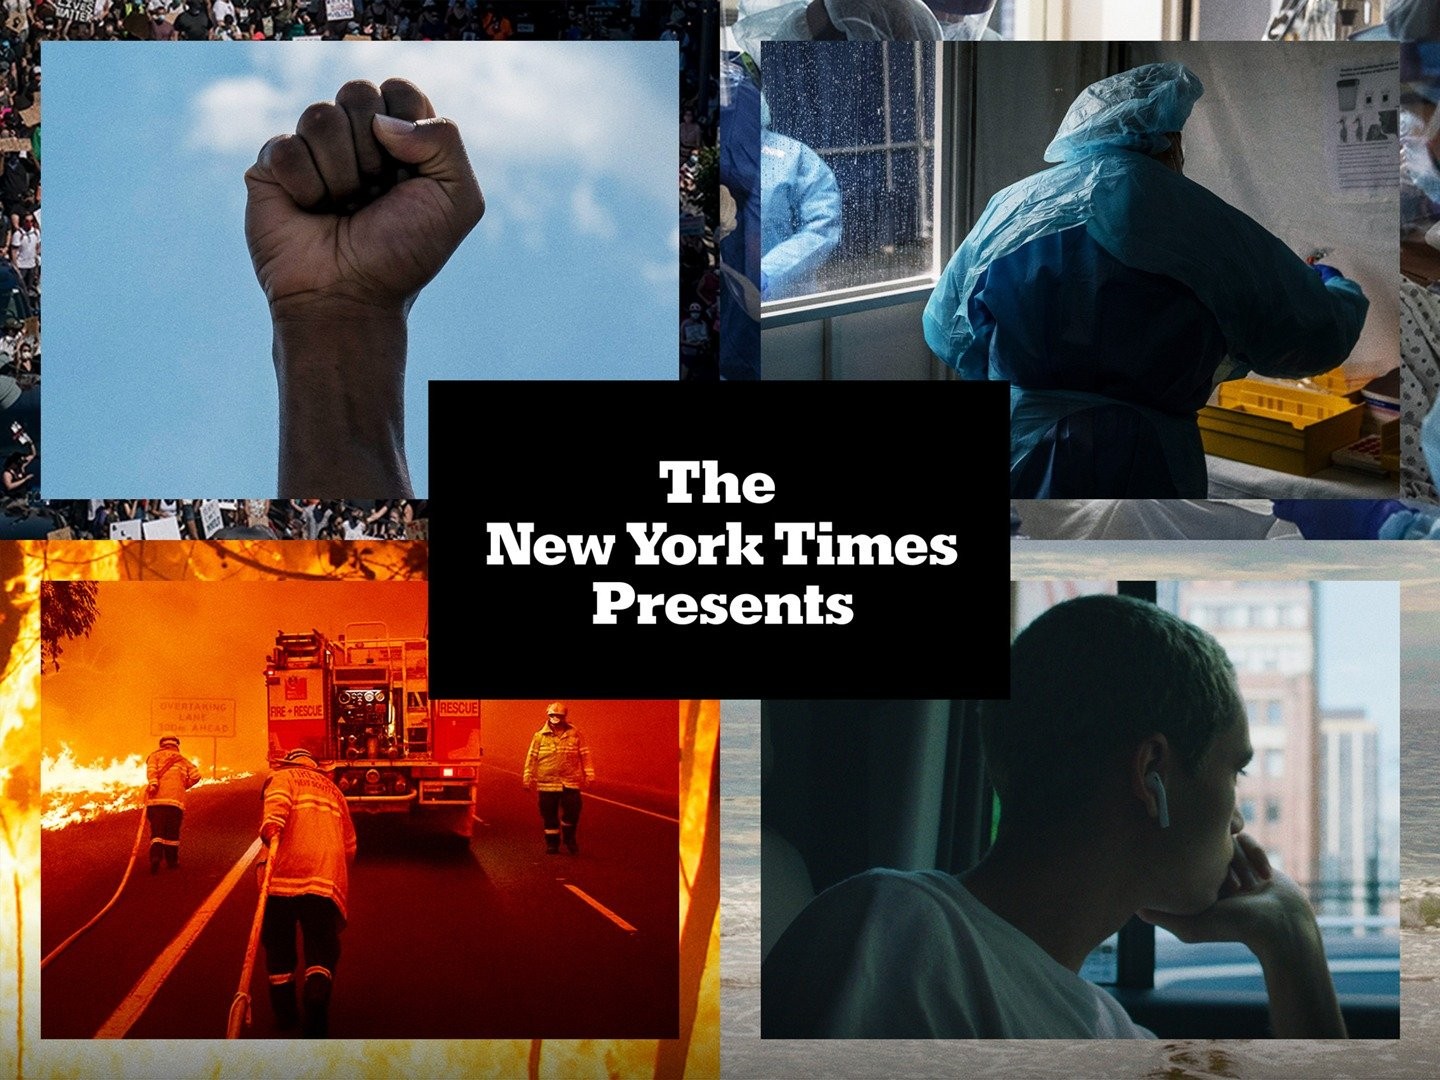 The New York Times Presents: 'Dominic Fike, at First' - The New York Times